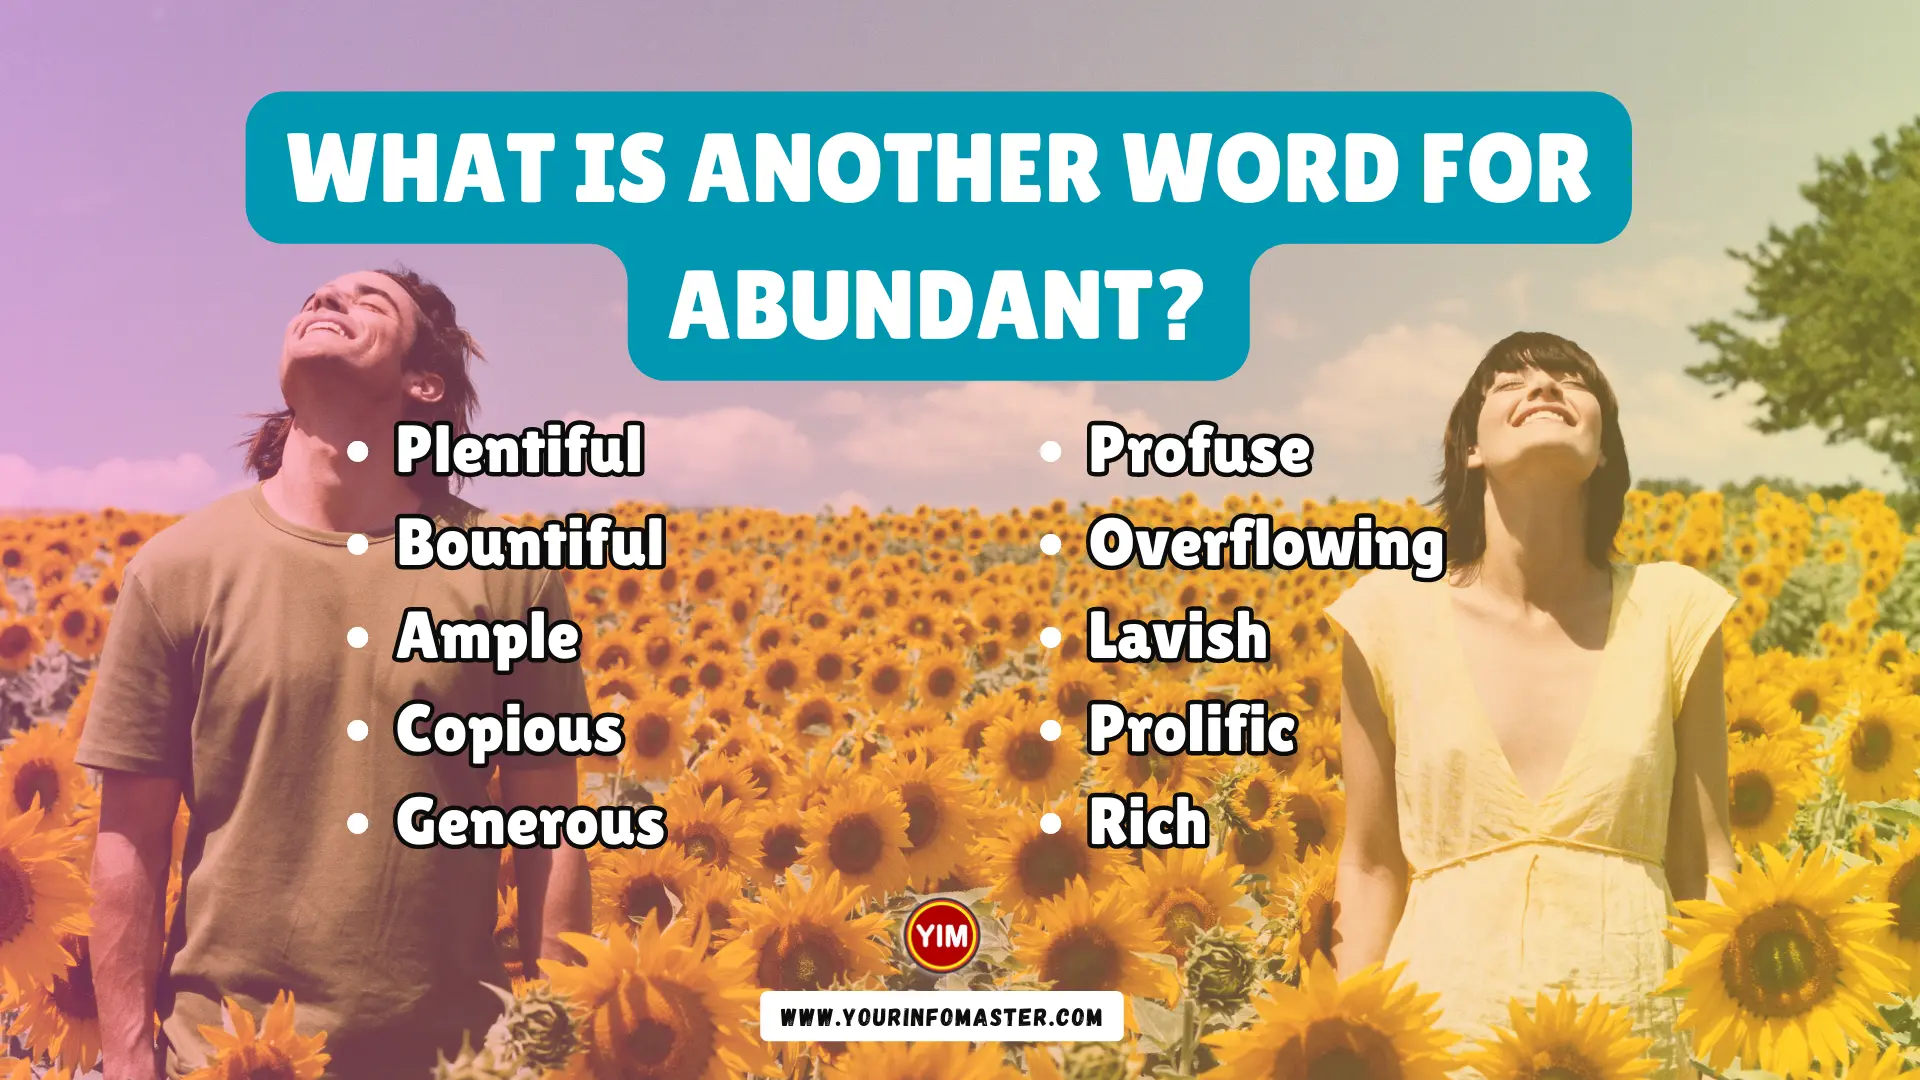 What is another word for Abundant